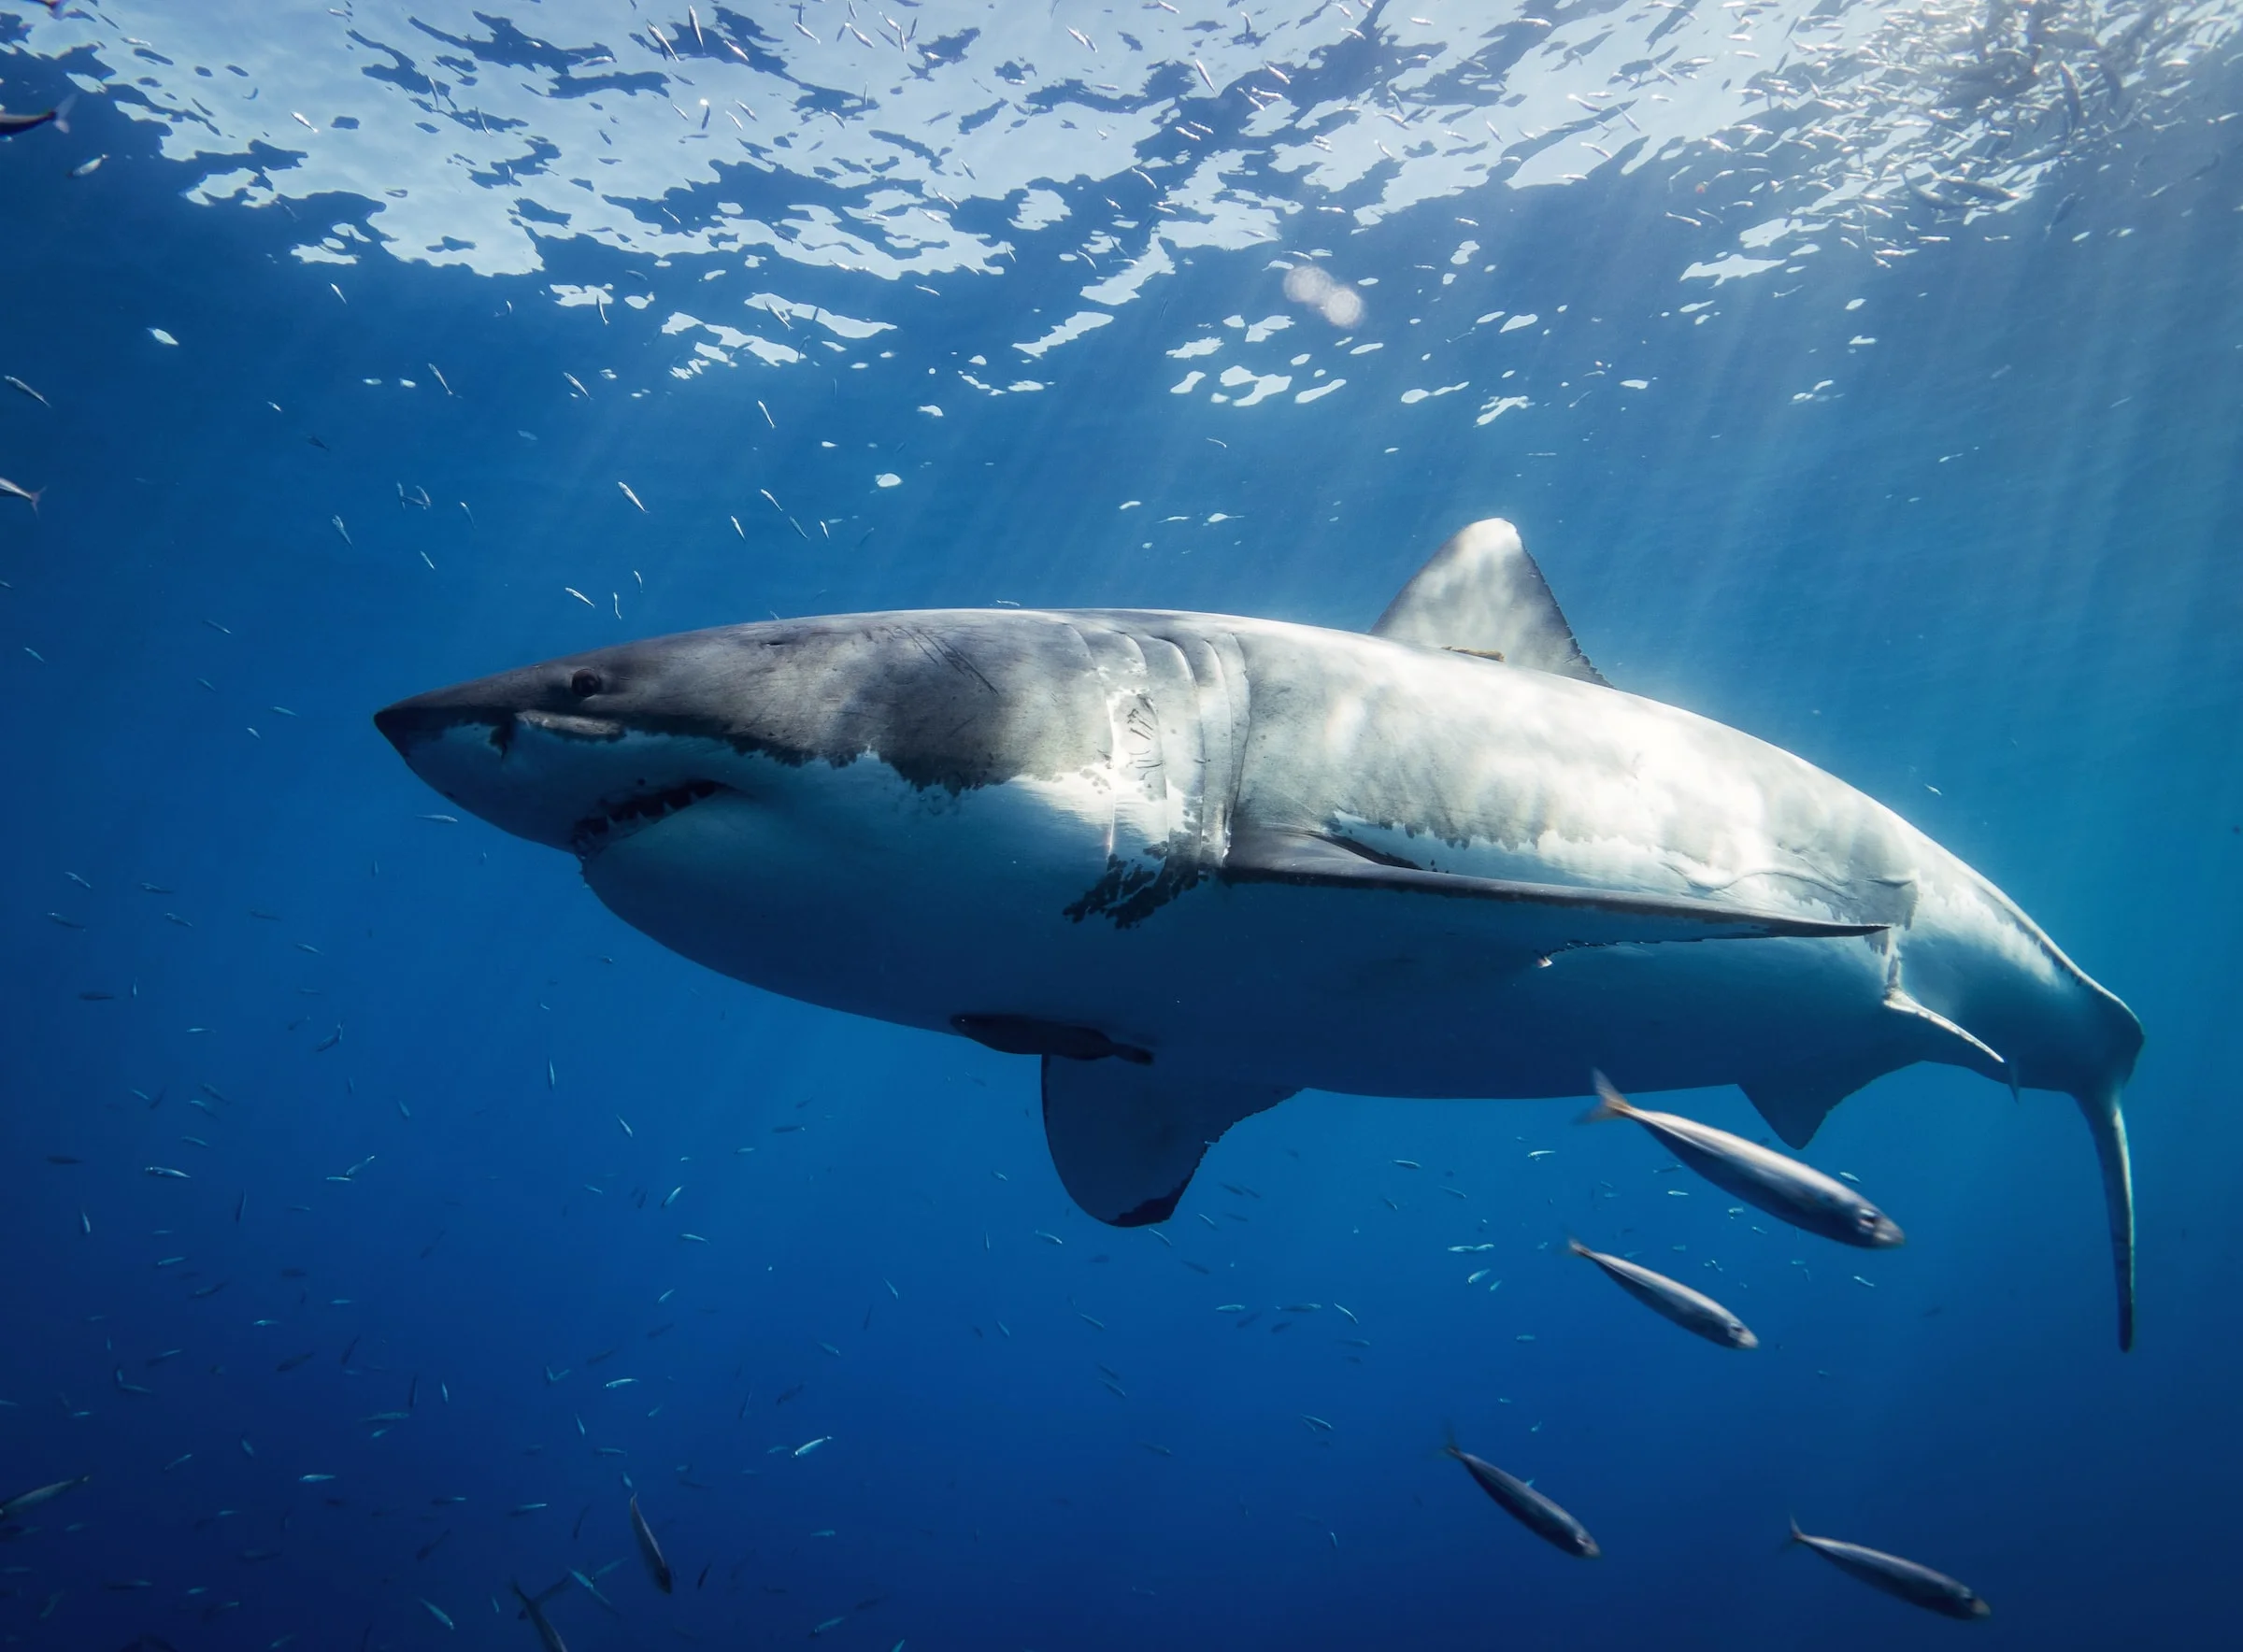 Great White Shark at Guadalupe Island, Mexico - Photo by Gerald Schömbs at Unsplash